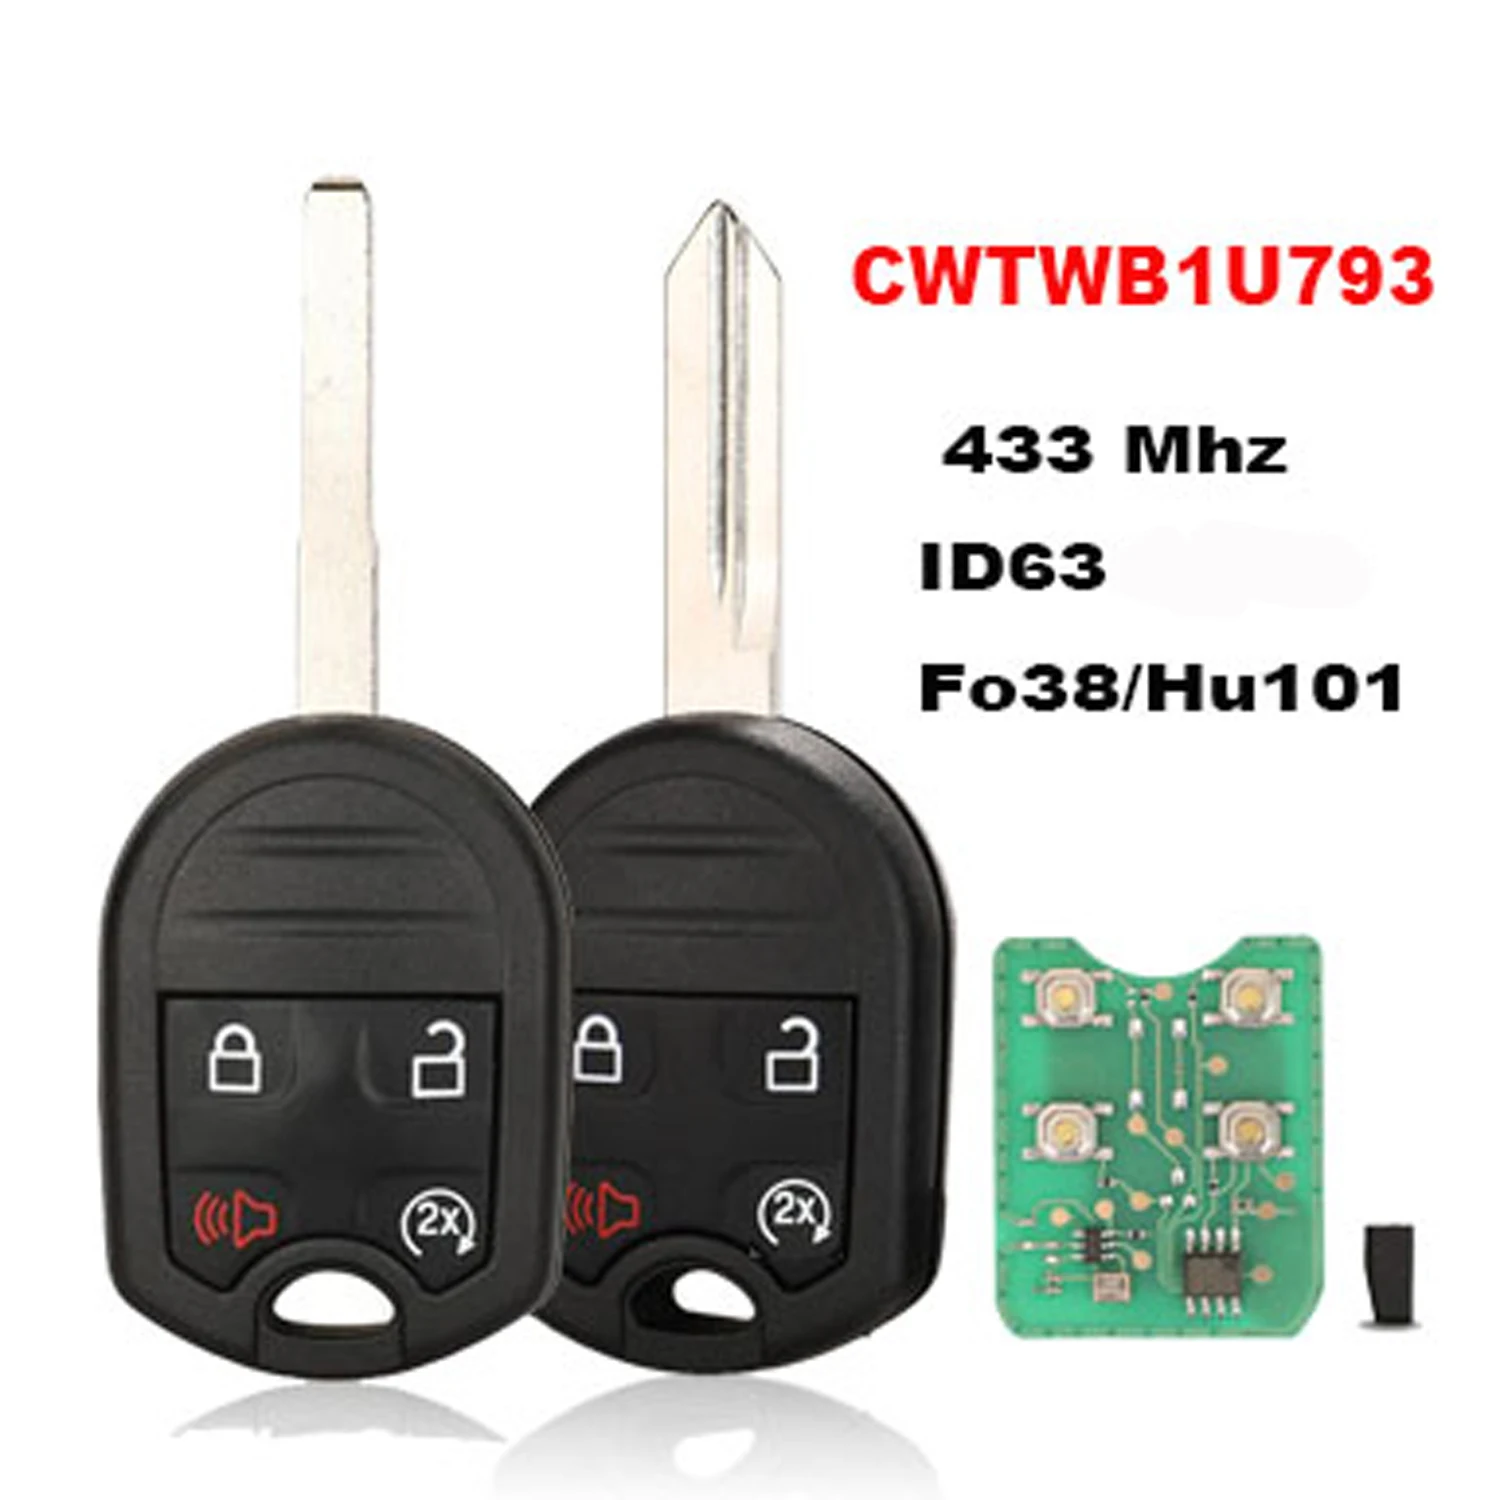 Remote Key ID63 315MHz 4 Buttons For Ford EDGE ESCAPE EXPEDITION EXPLORER FLEX FUSION MUSTAN TAURUS